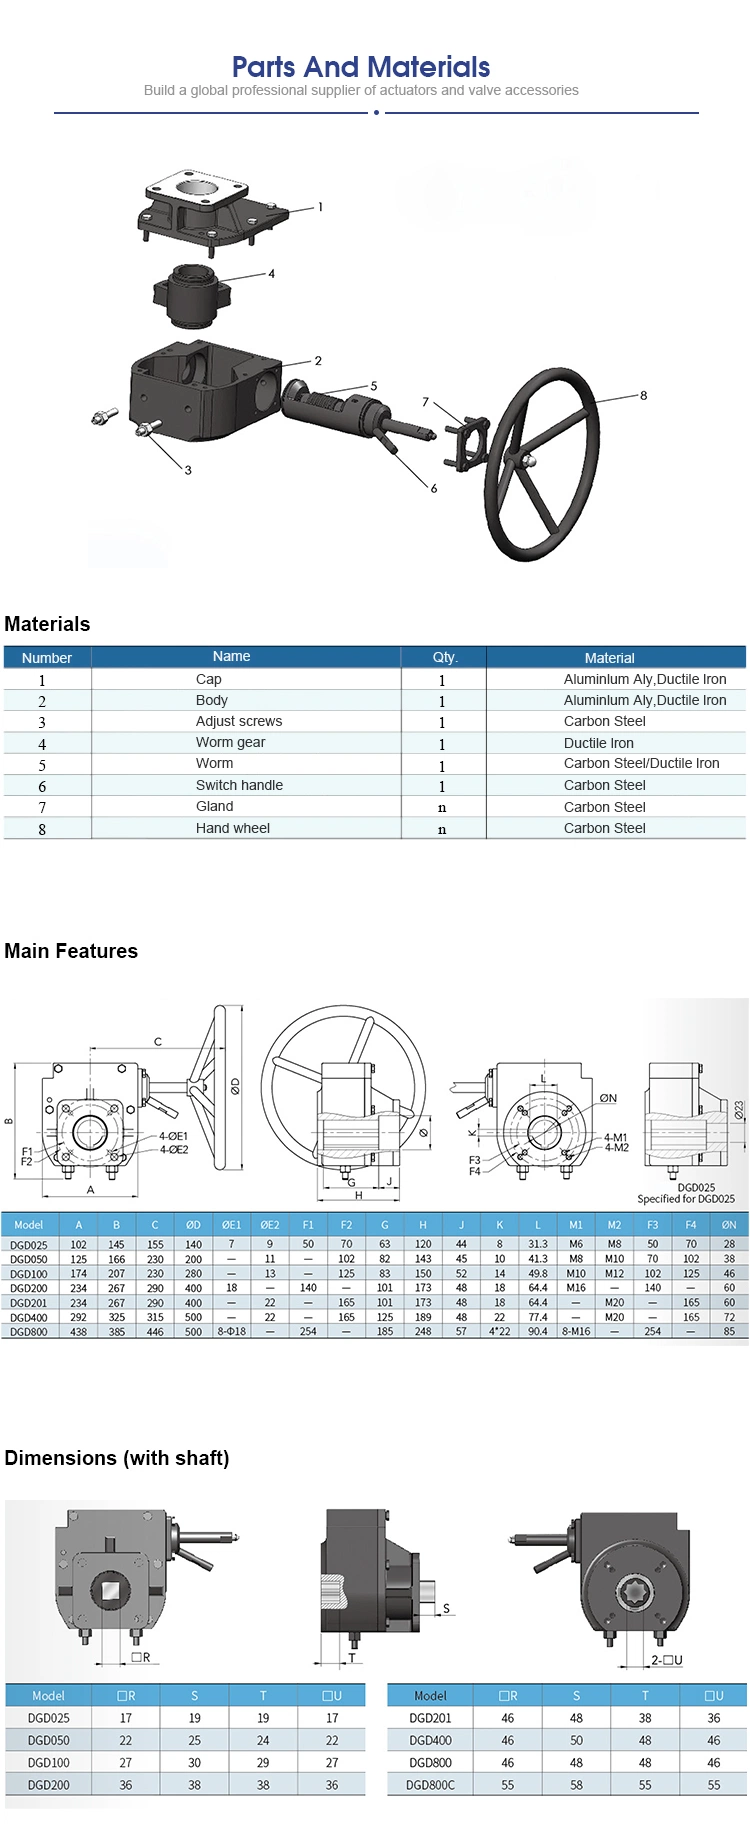 CE /ISO Featured Products Gear Box with Pneumatic Actuator for Valve Control